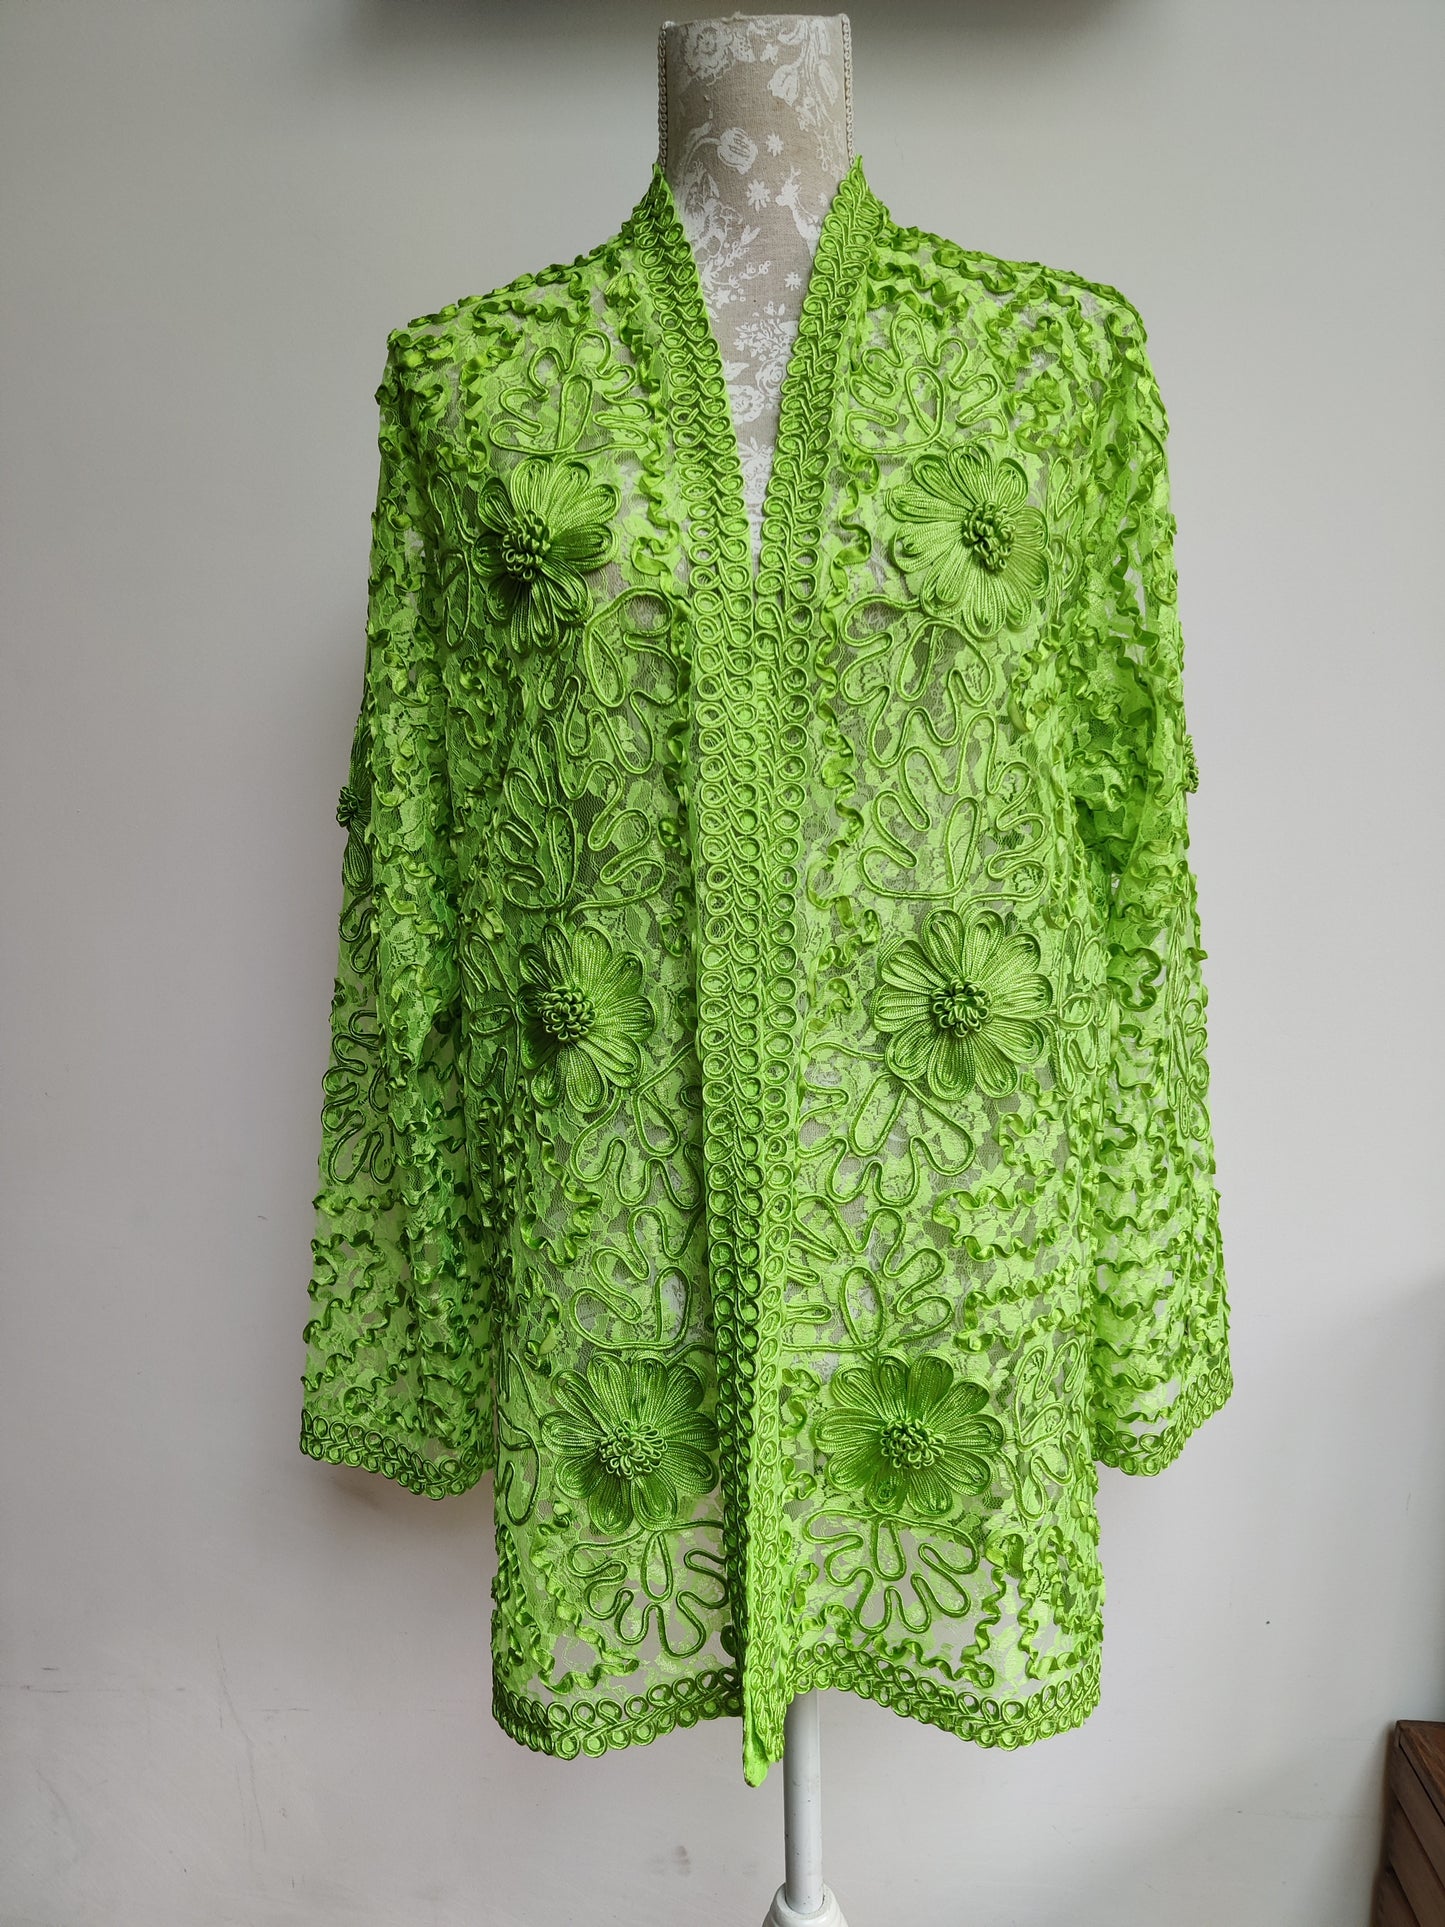 Striking lime green lace cardigan. Size 20.